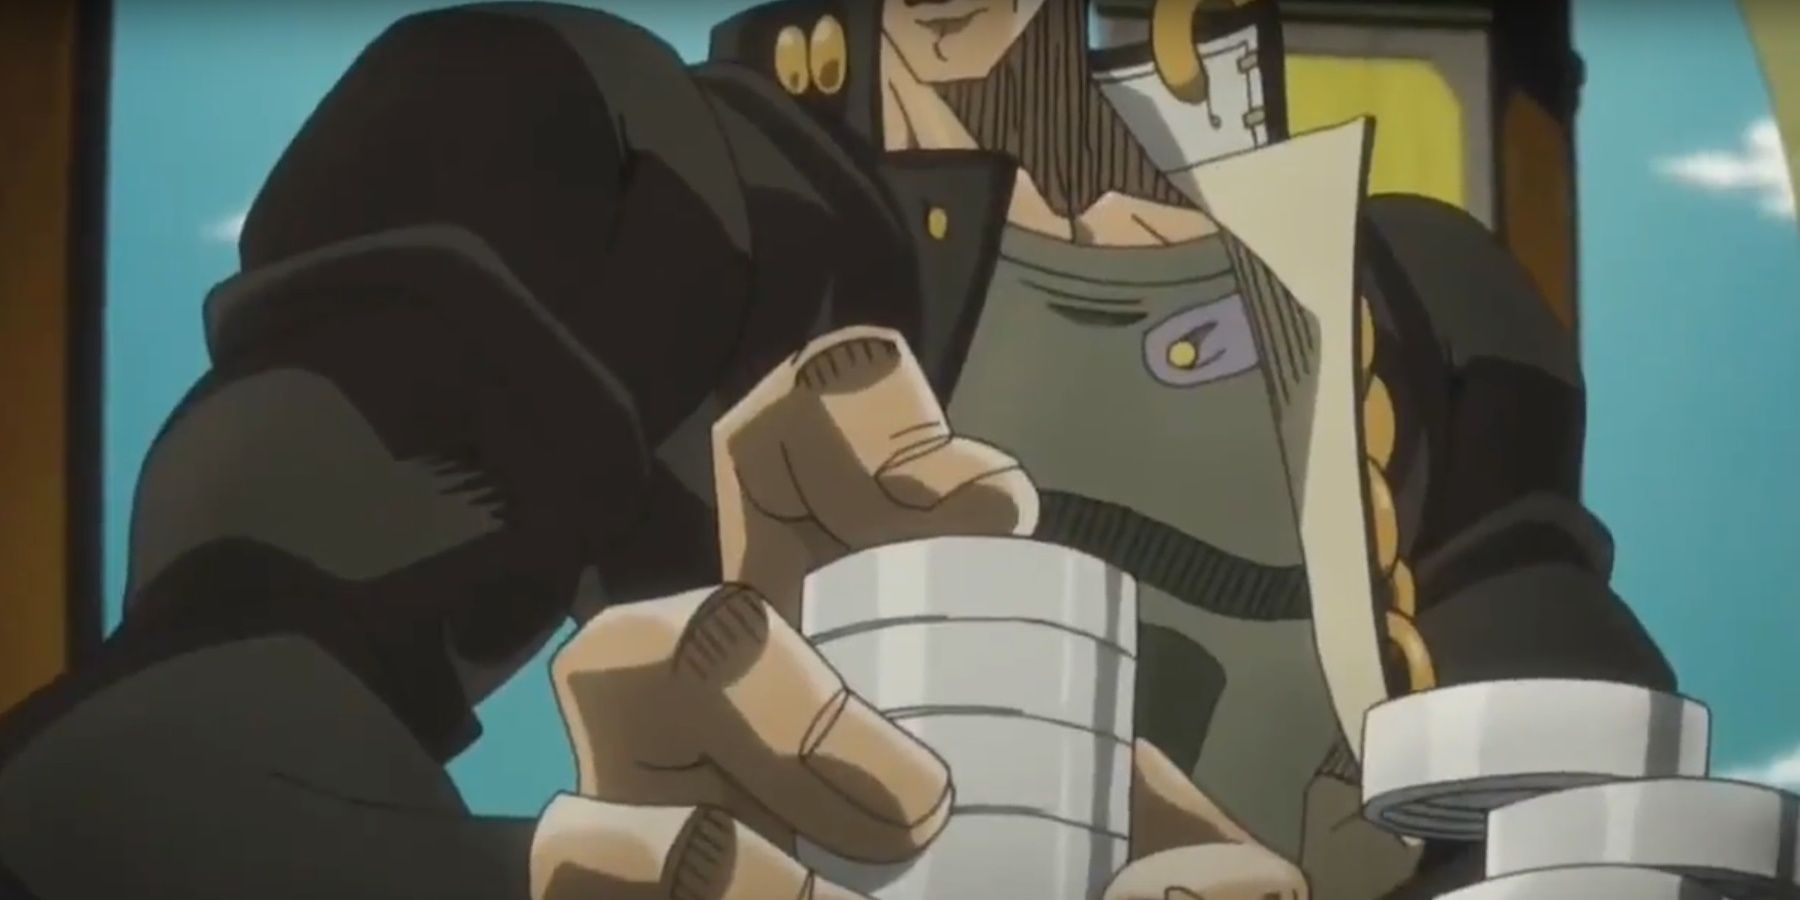 Jotaro holding Poker Chips during his game against D'Arby in JoJo's Bizarre Adventure.